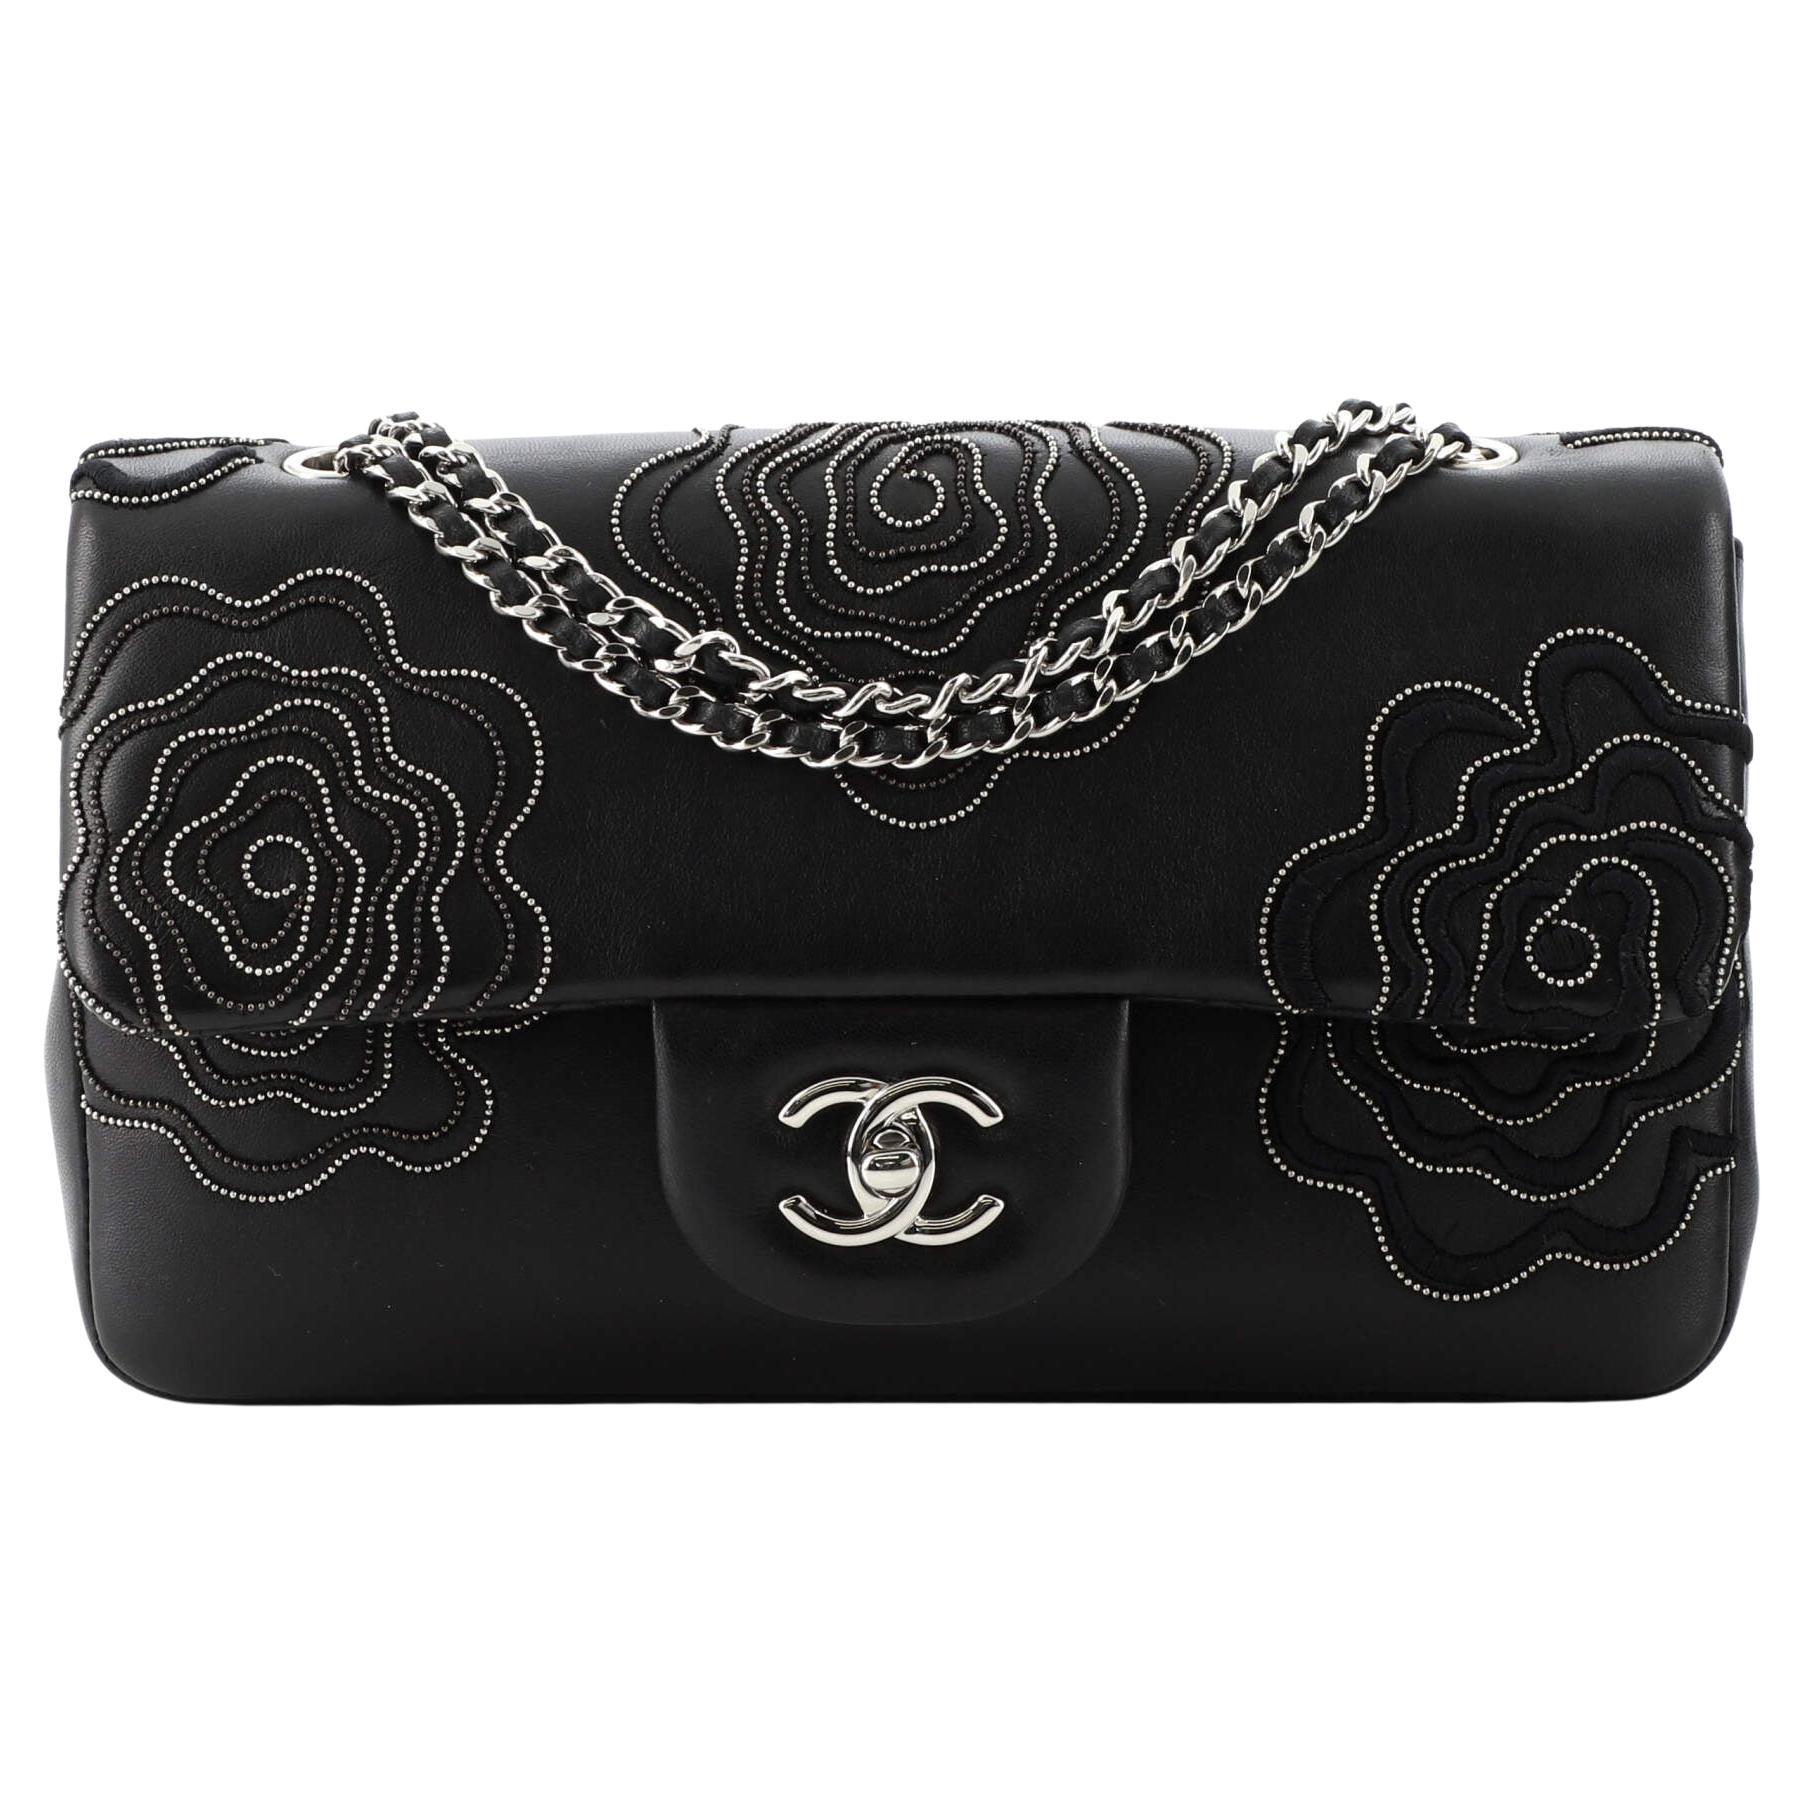 Chanel Neoprene Flap Bag Embroidered with Navy Blue Camellias